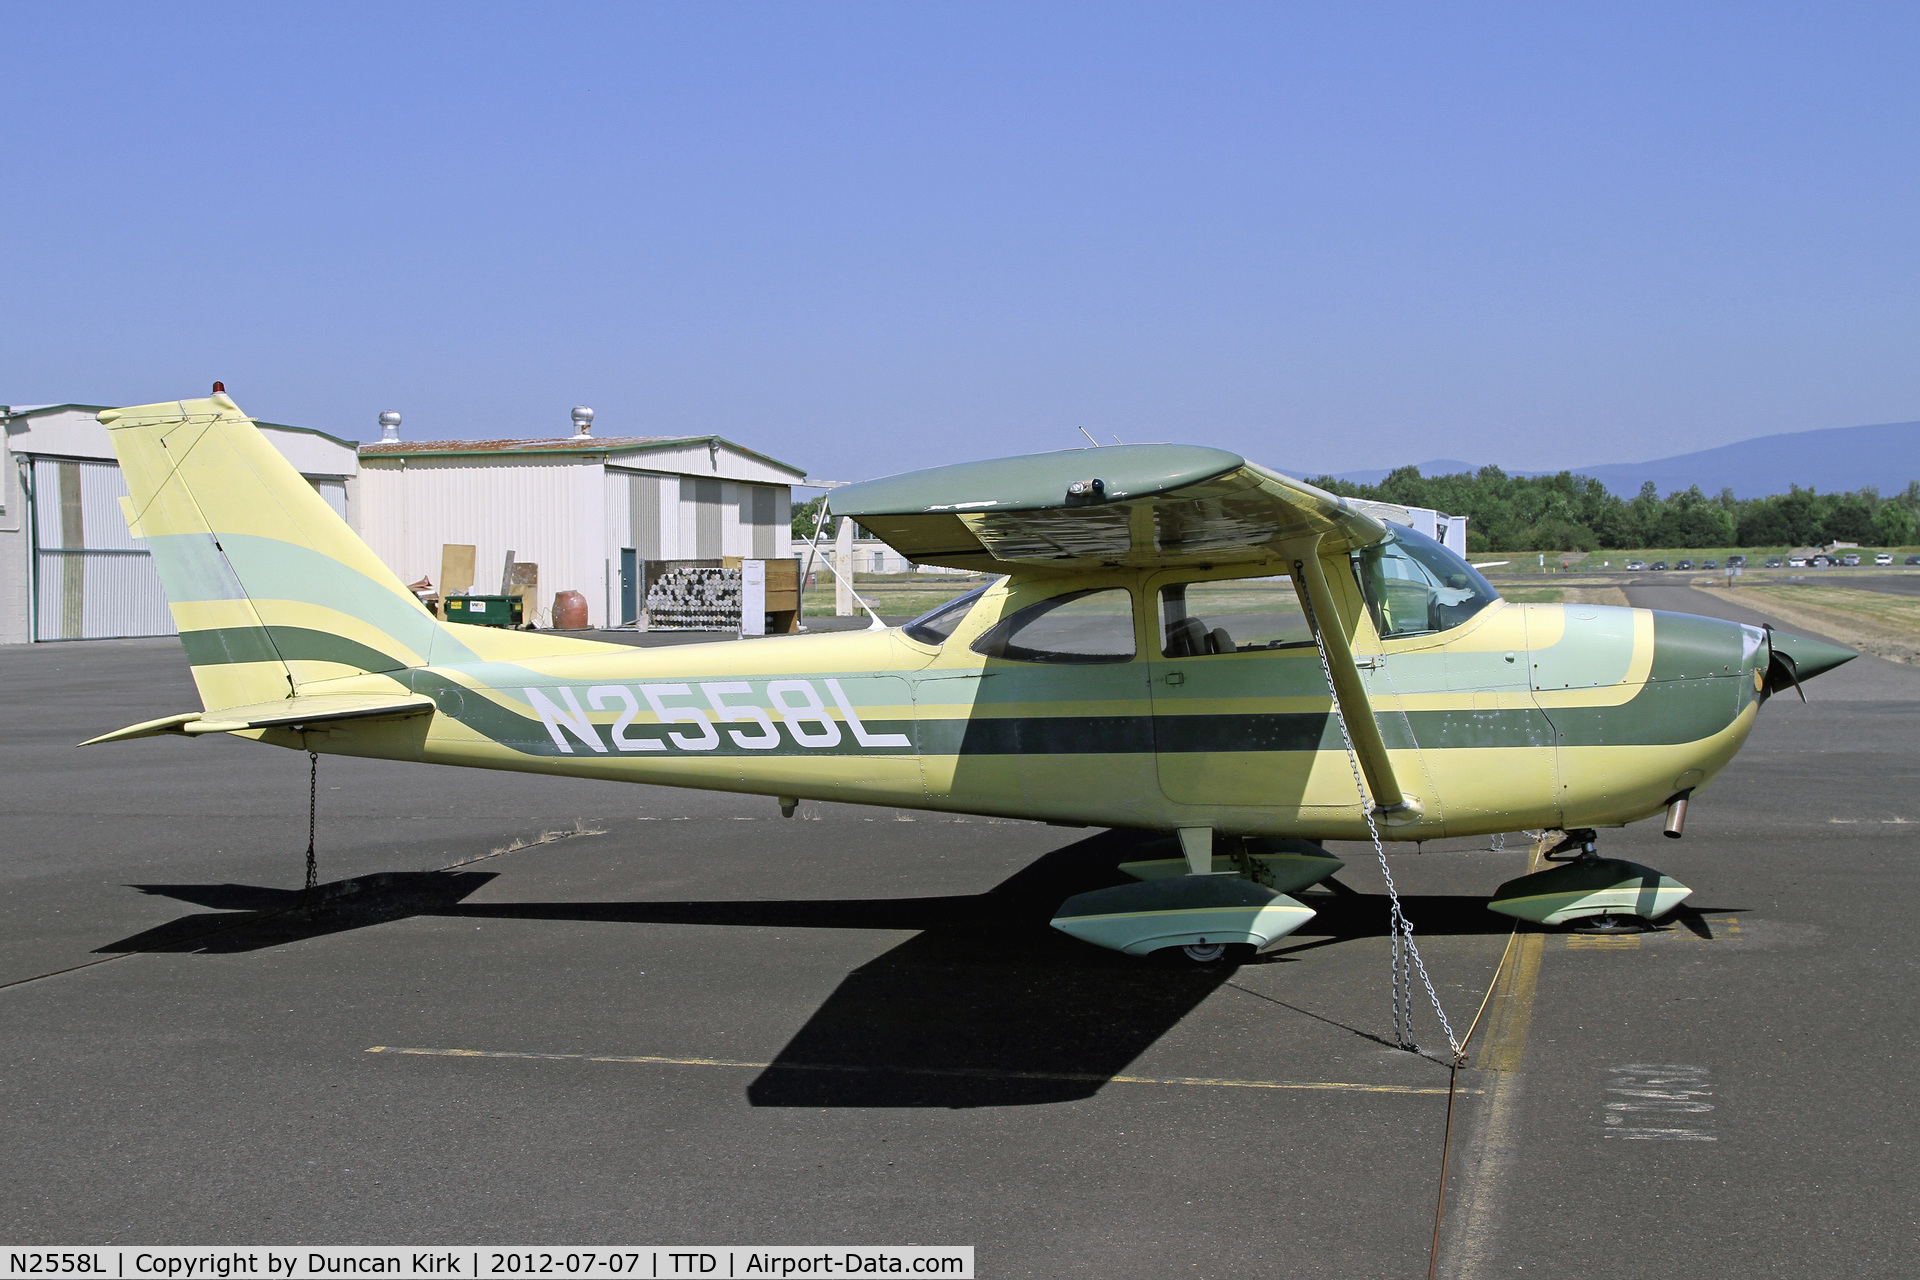 N2558L, 1967 Cessna 172H C/N 17255758, Rather snazzy scheme on this Cessna!